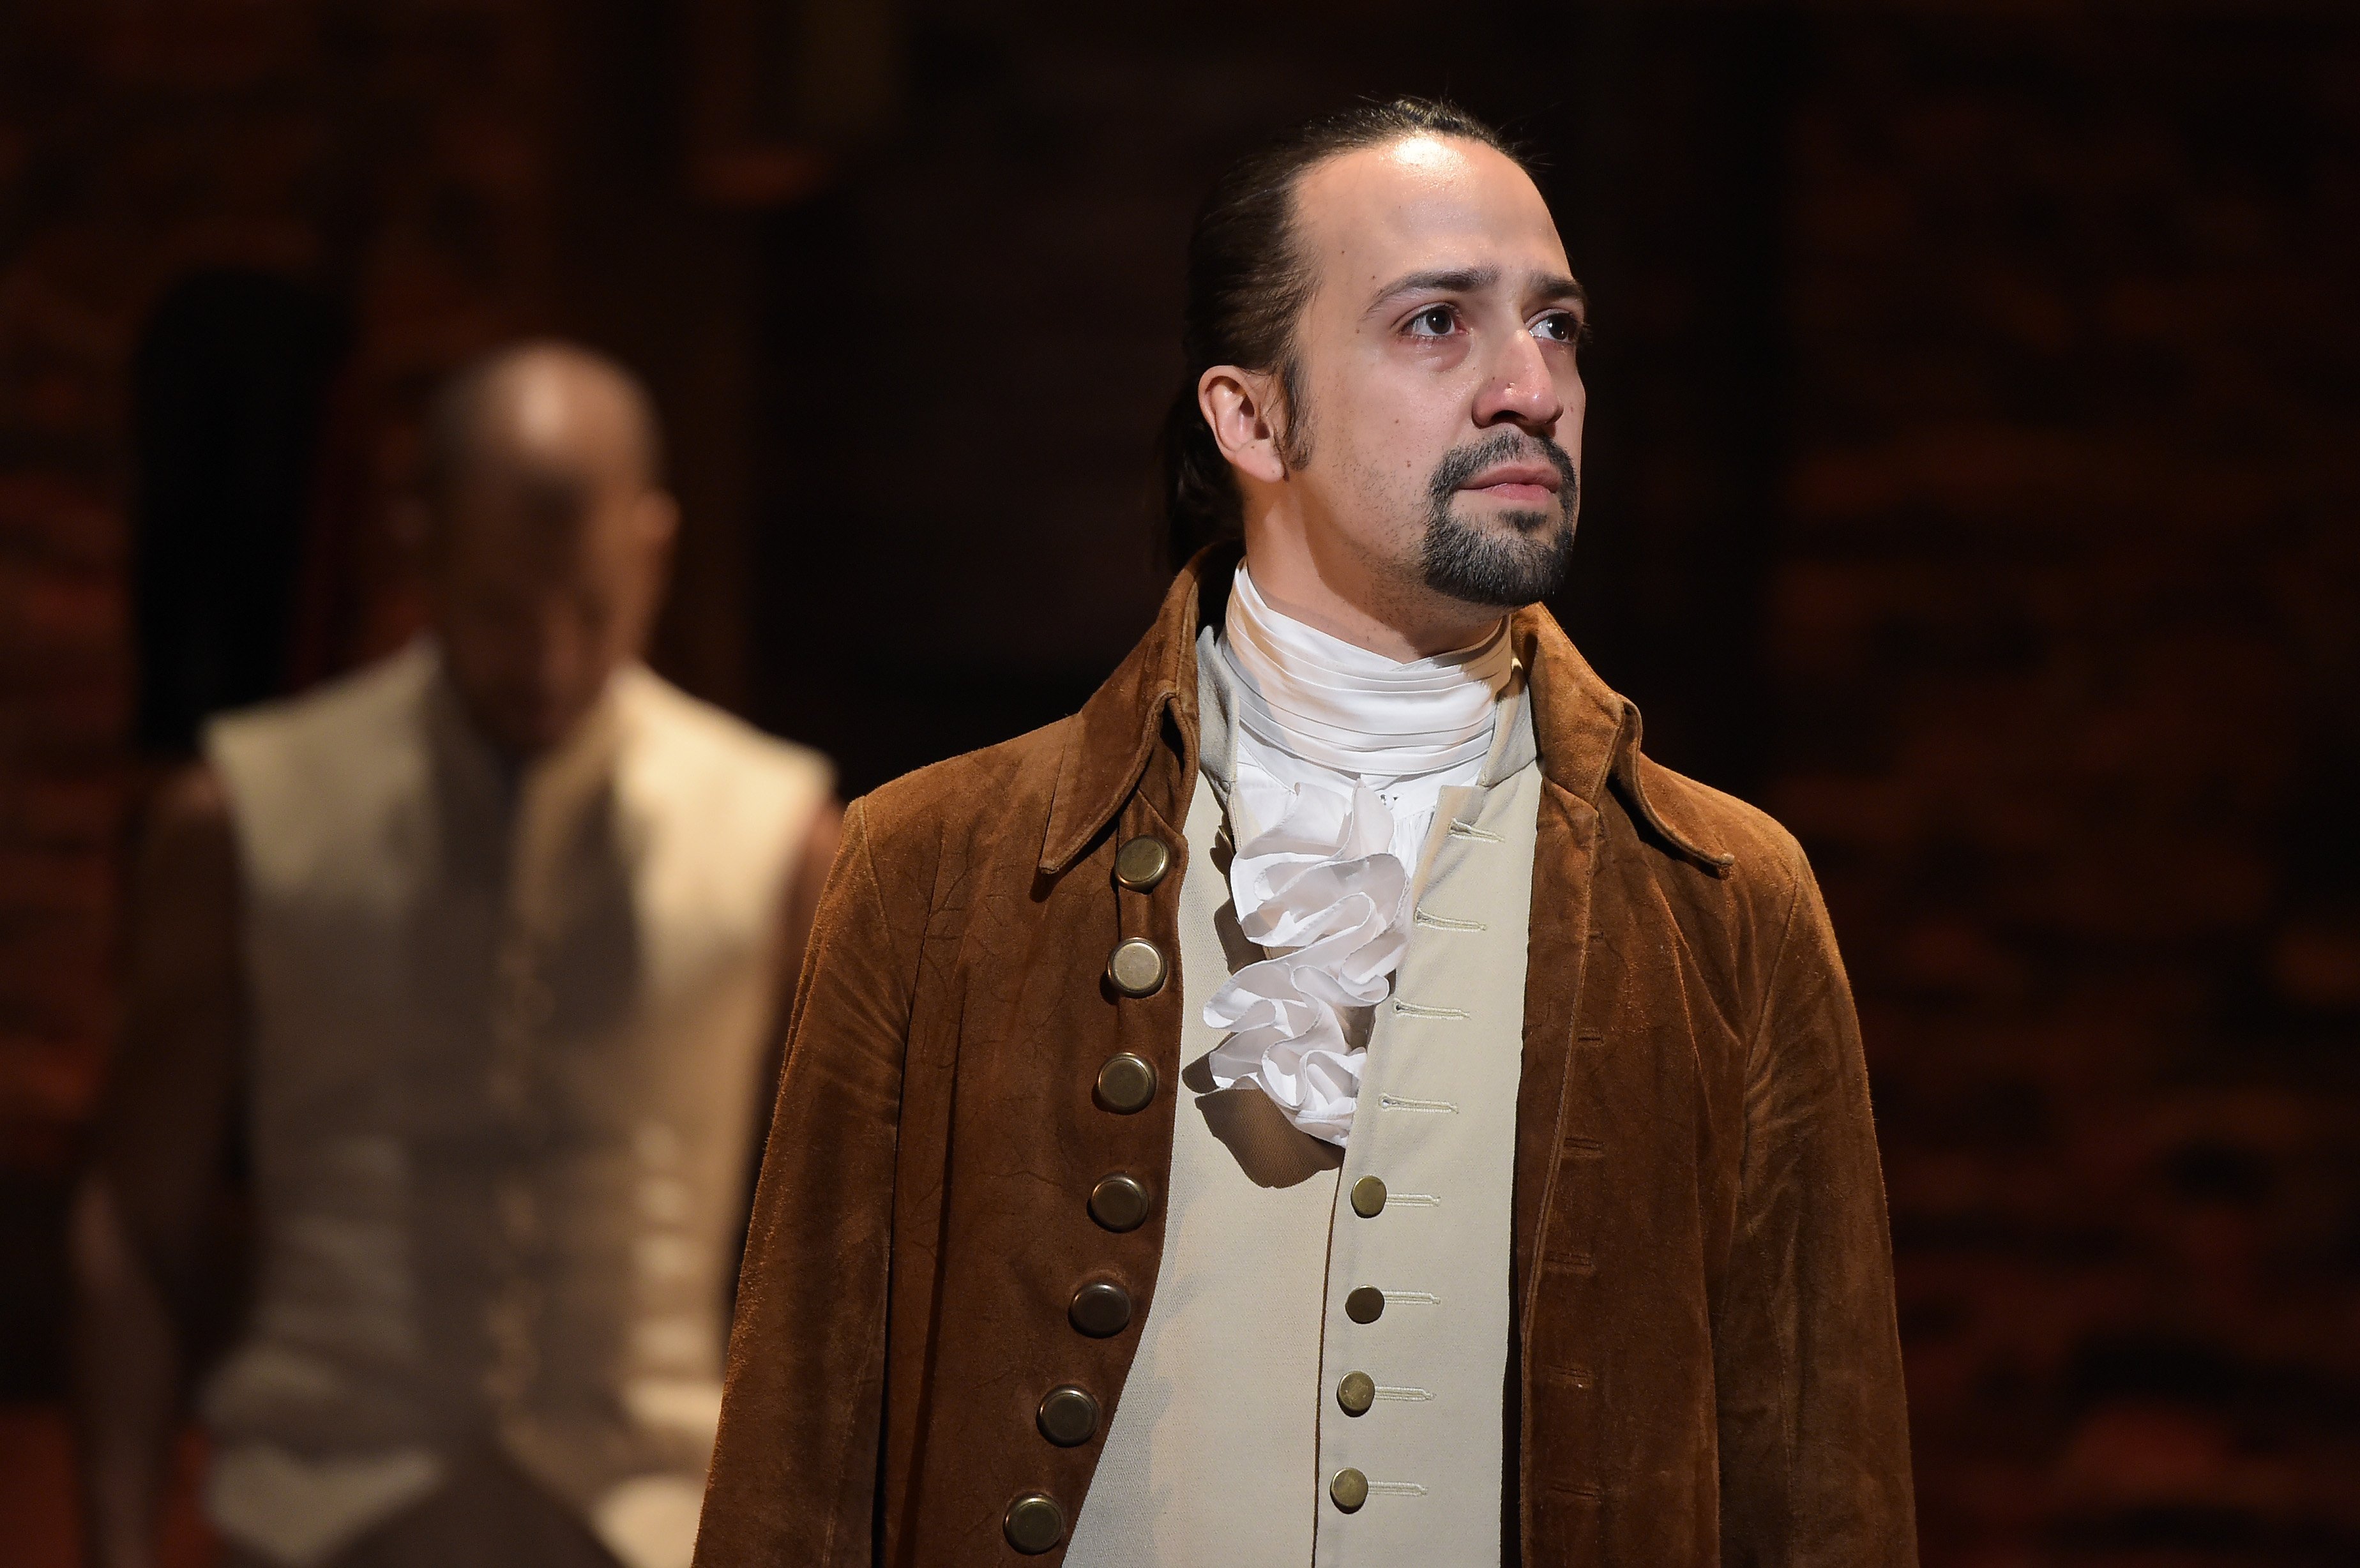 Broadway actor Lin-Manuel Miranda during his Grammy performance for "Hamilton" in 2016. | Photo: Getty Images